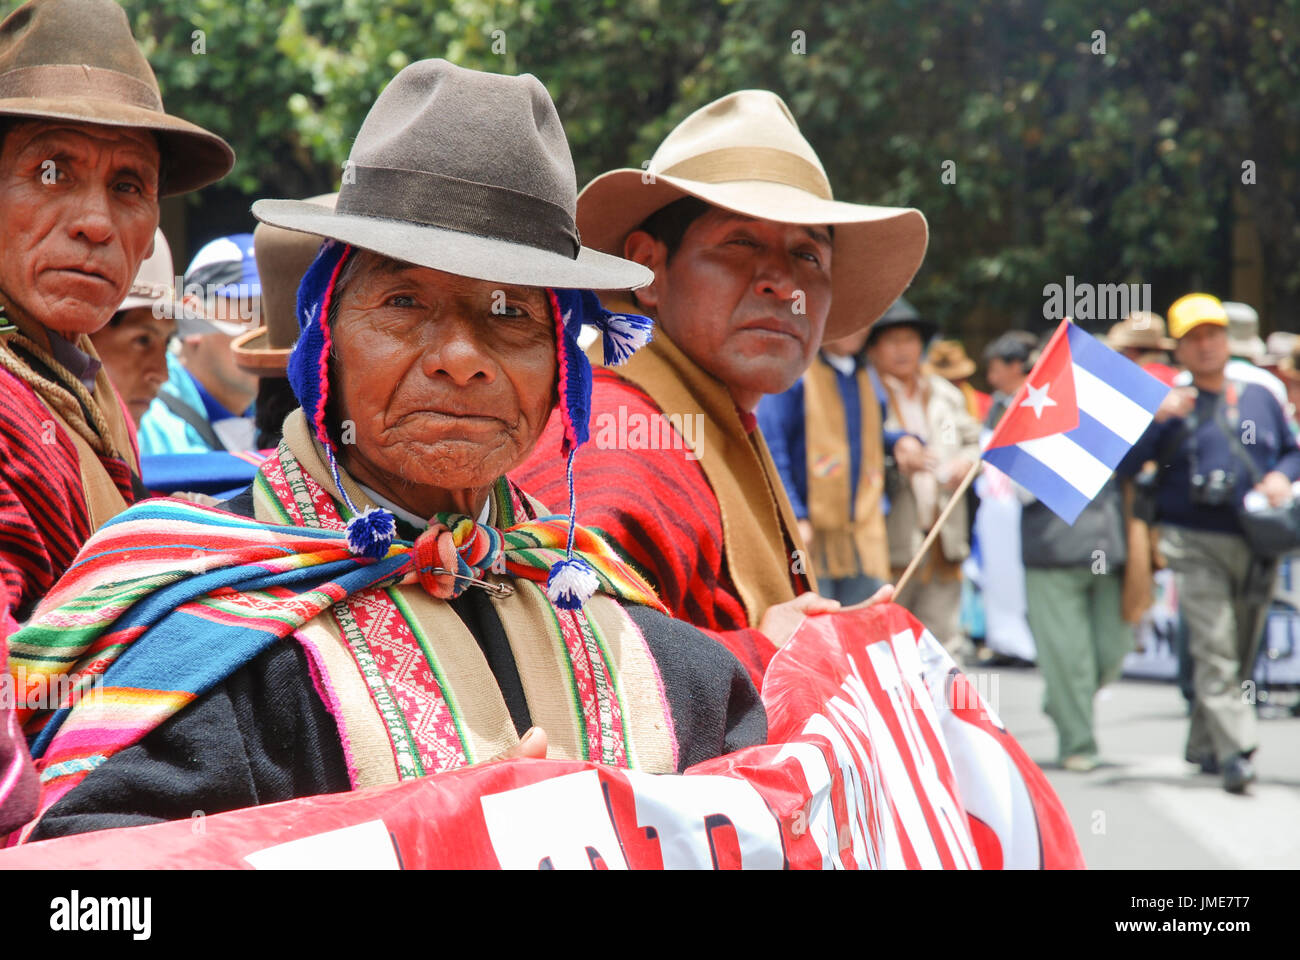 Bolivian men in traditional costumes during the celebration of plurinational state foundation day, La Paz, Bolivia, South America Stock Photo